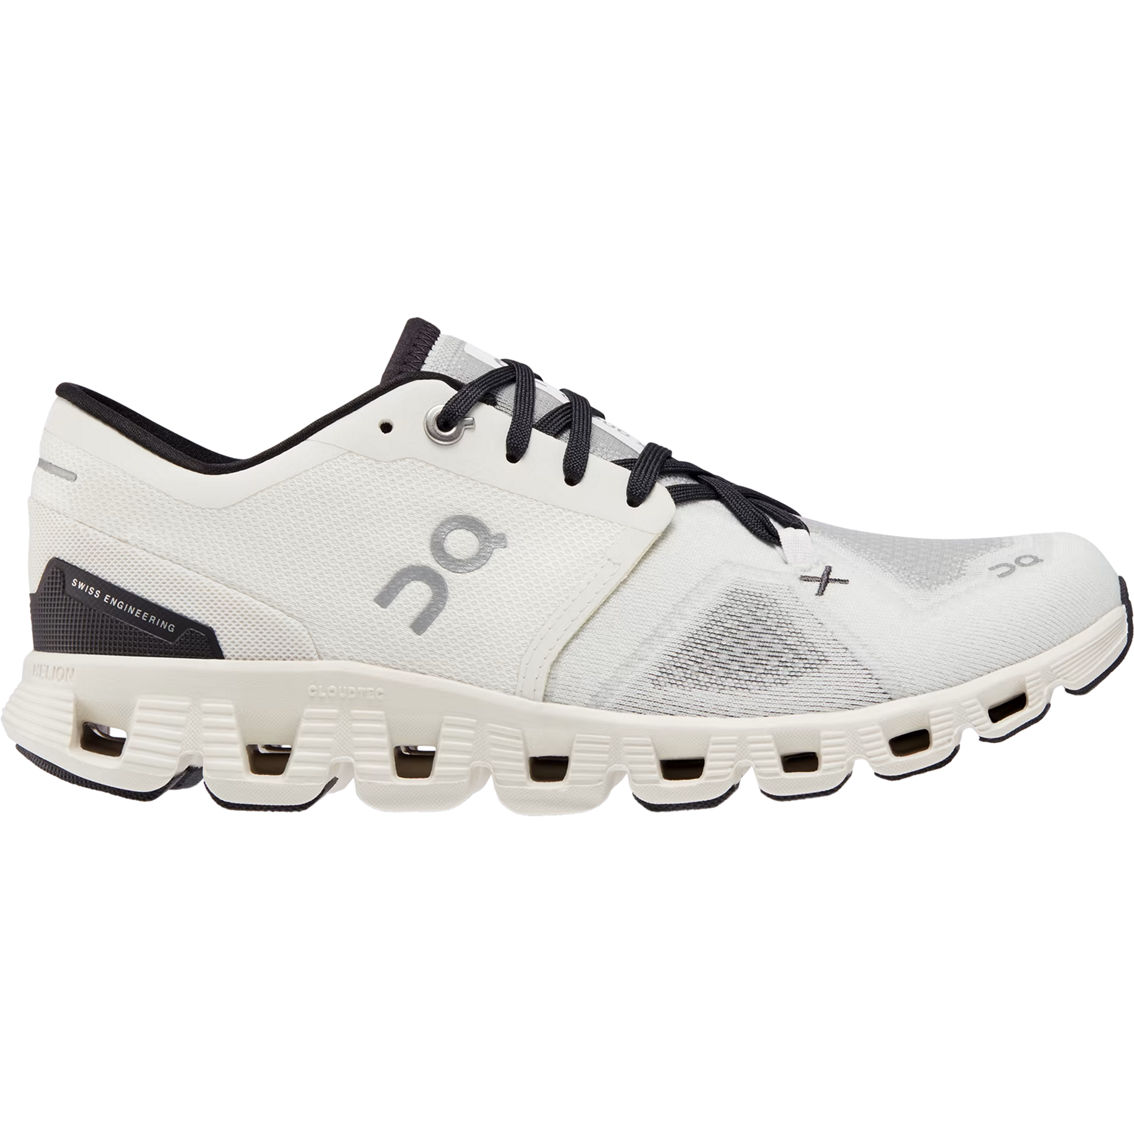 On Women's Cloud X 3 Running Shoes - Image 2 of 6